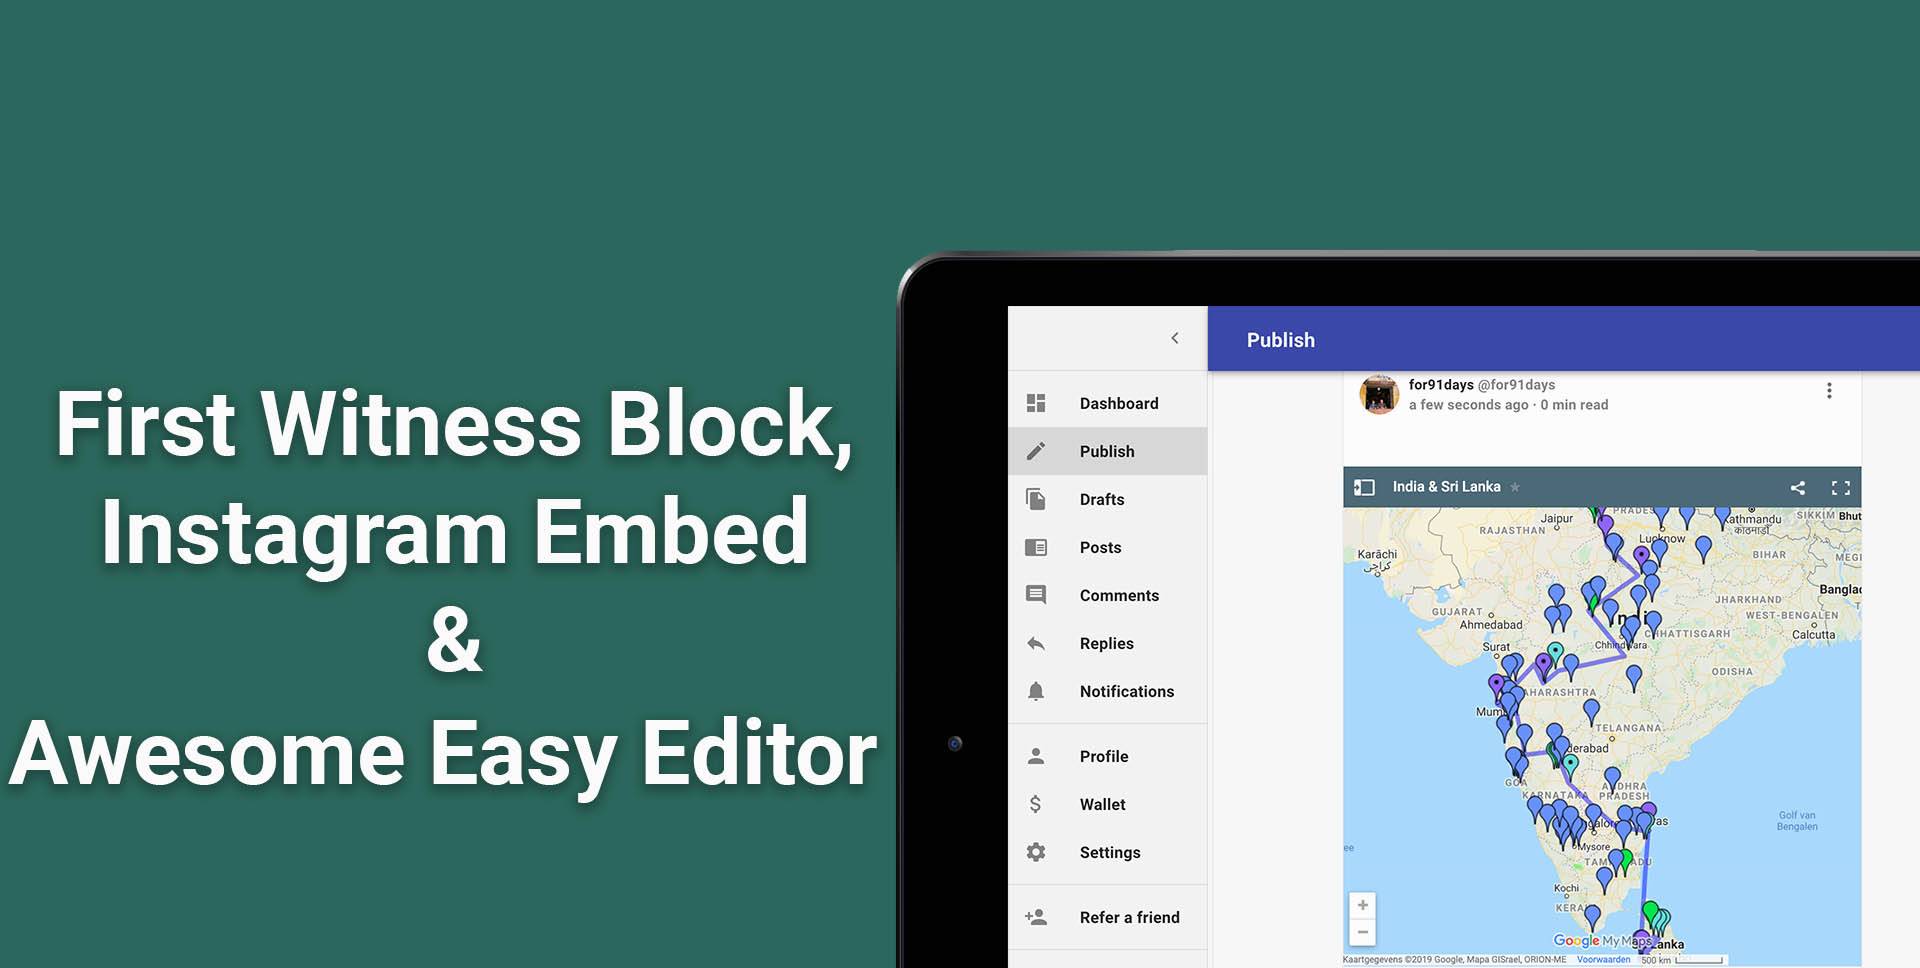 Updates: First Witness Block, Instagram Embeds & Awesome EasyEditor